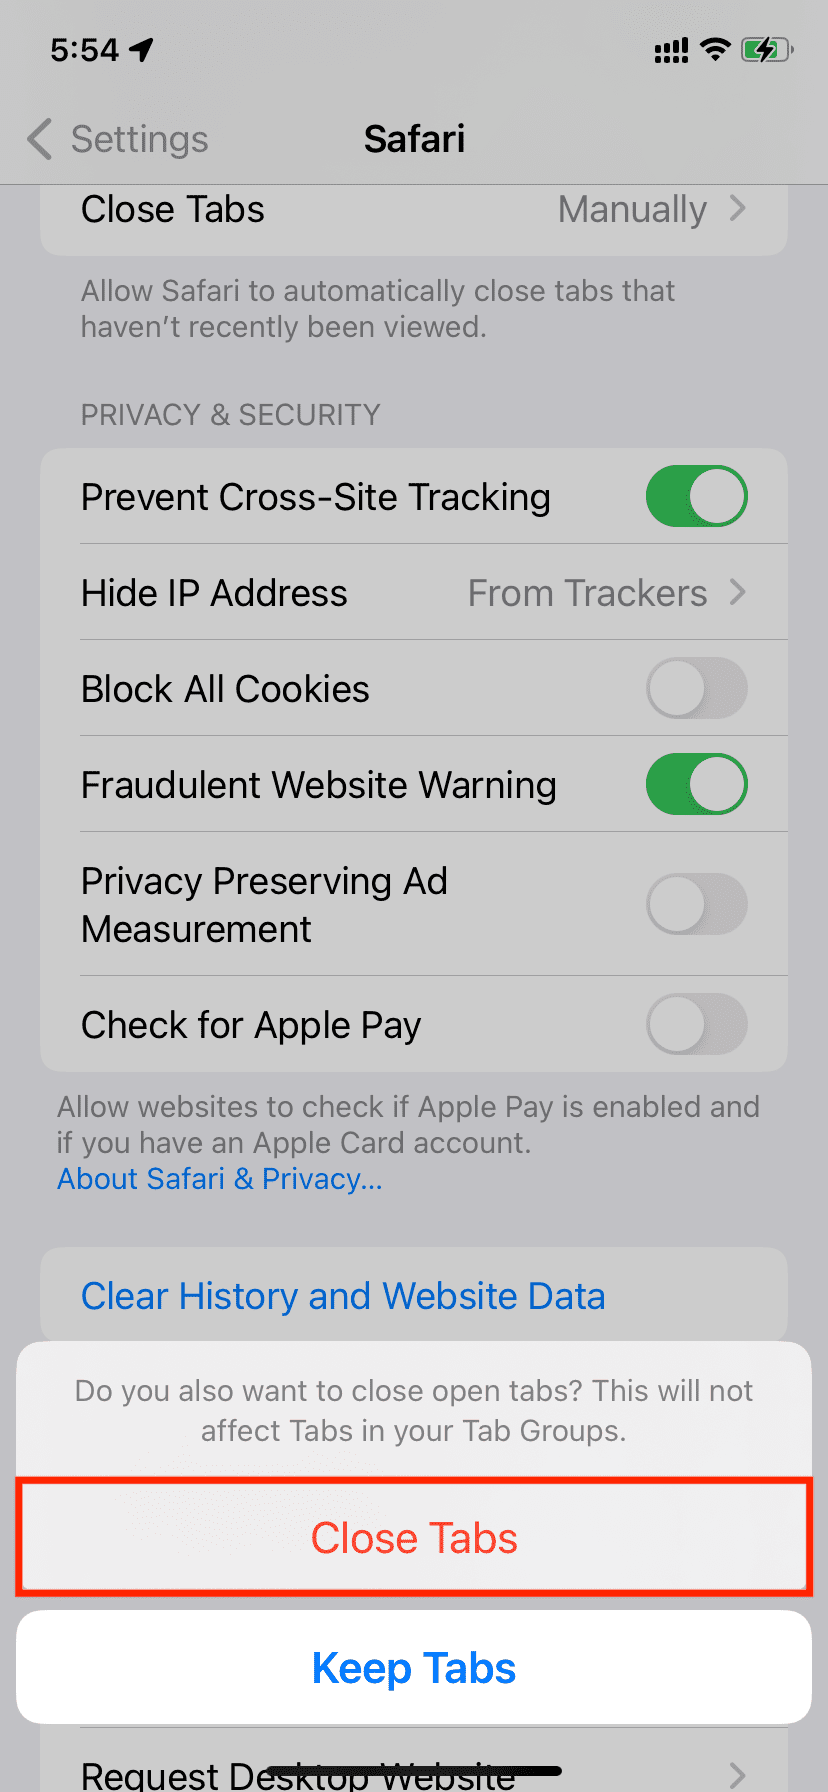 Close Tabs when clearing Safari history on iPhone